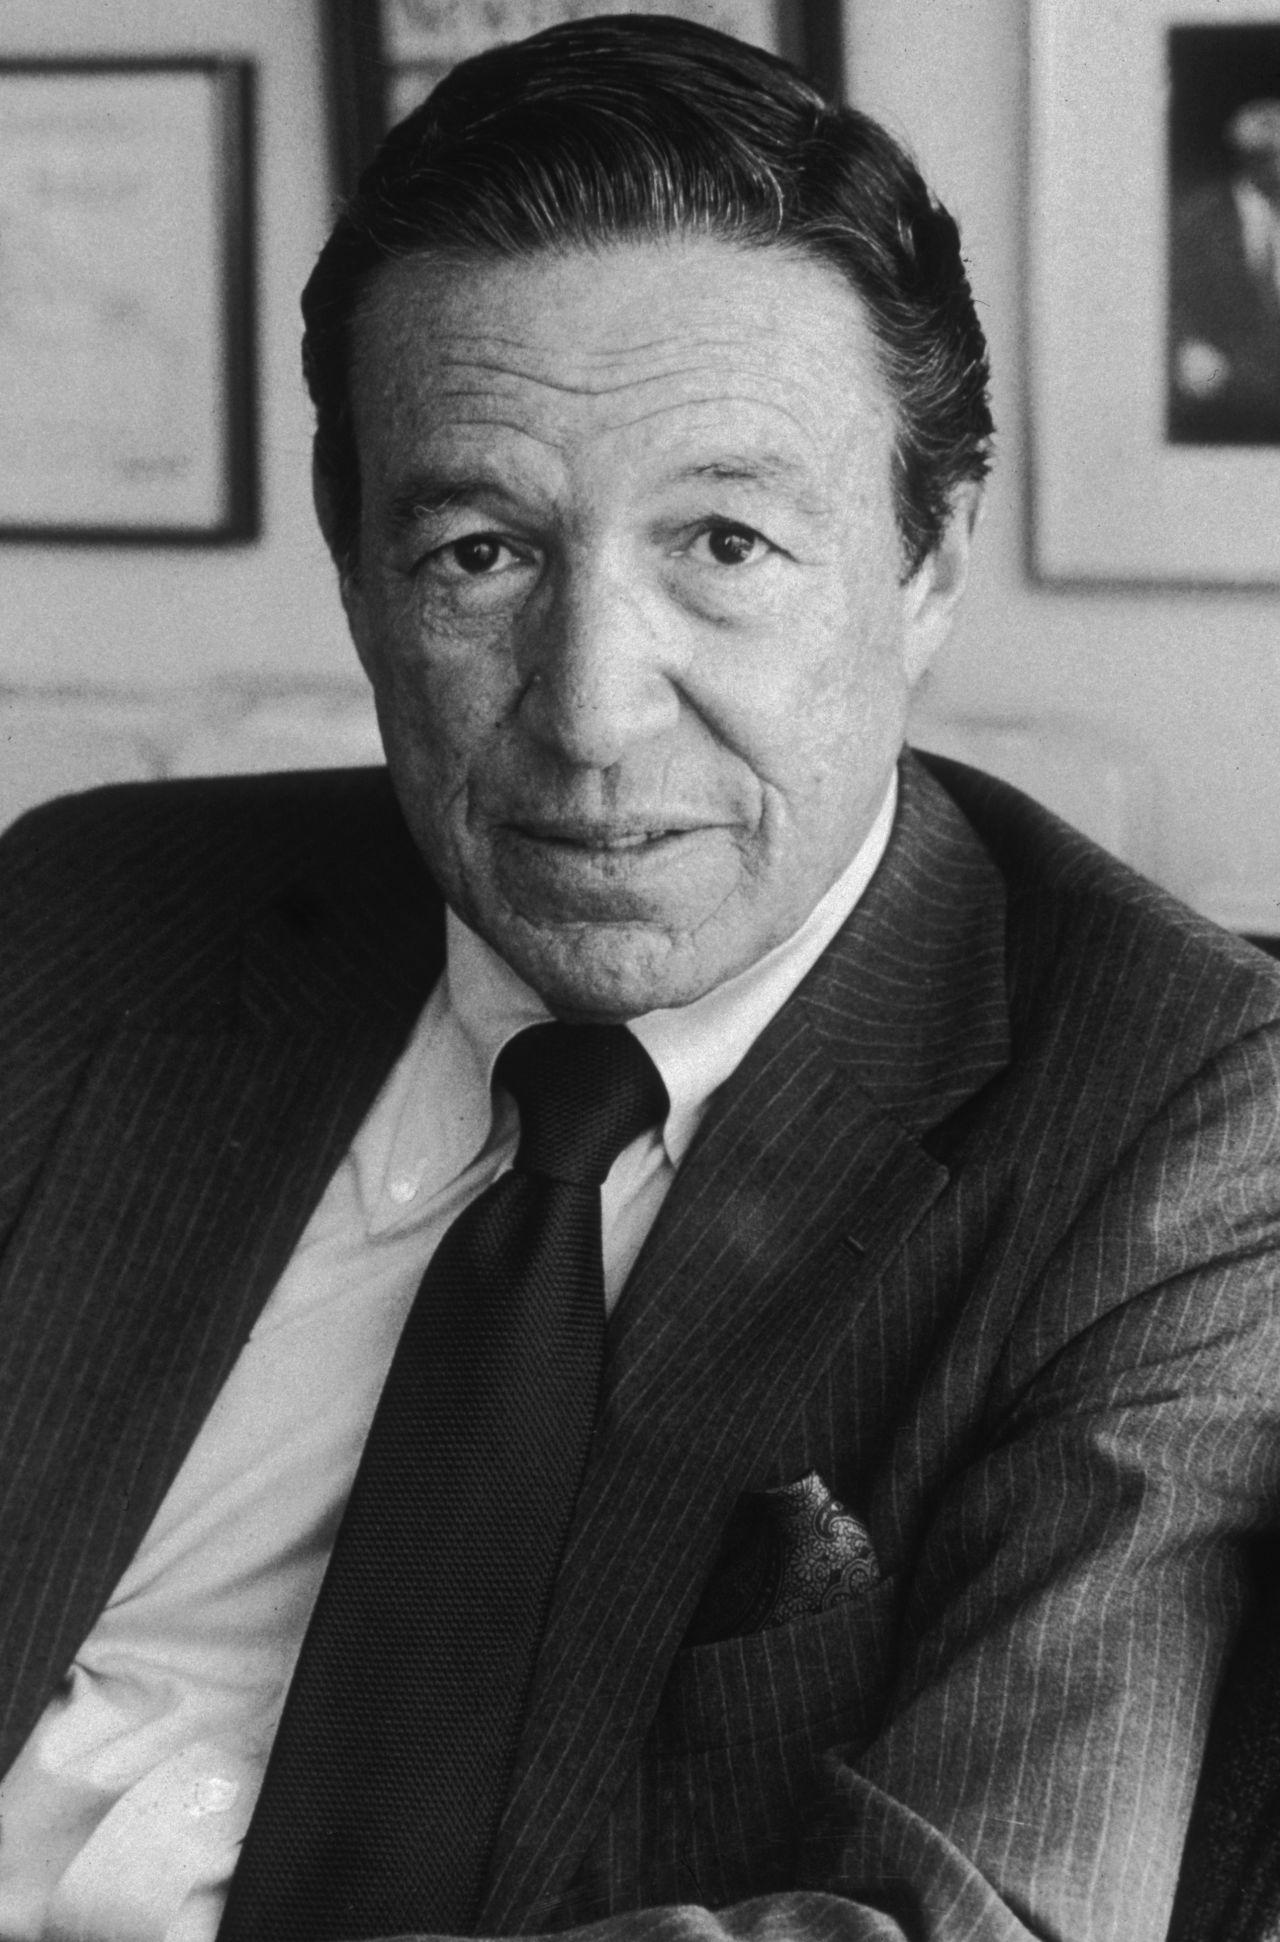 Mike Wallace, who spent four decades as a hard-hitting, provocative news correspondent on "60 Minutes," has died, CBS reported Sunday. He was 93. Wallace is shown in his New York City office in this 1984 portrait.  